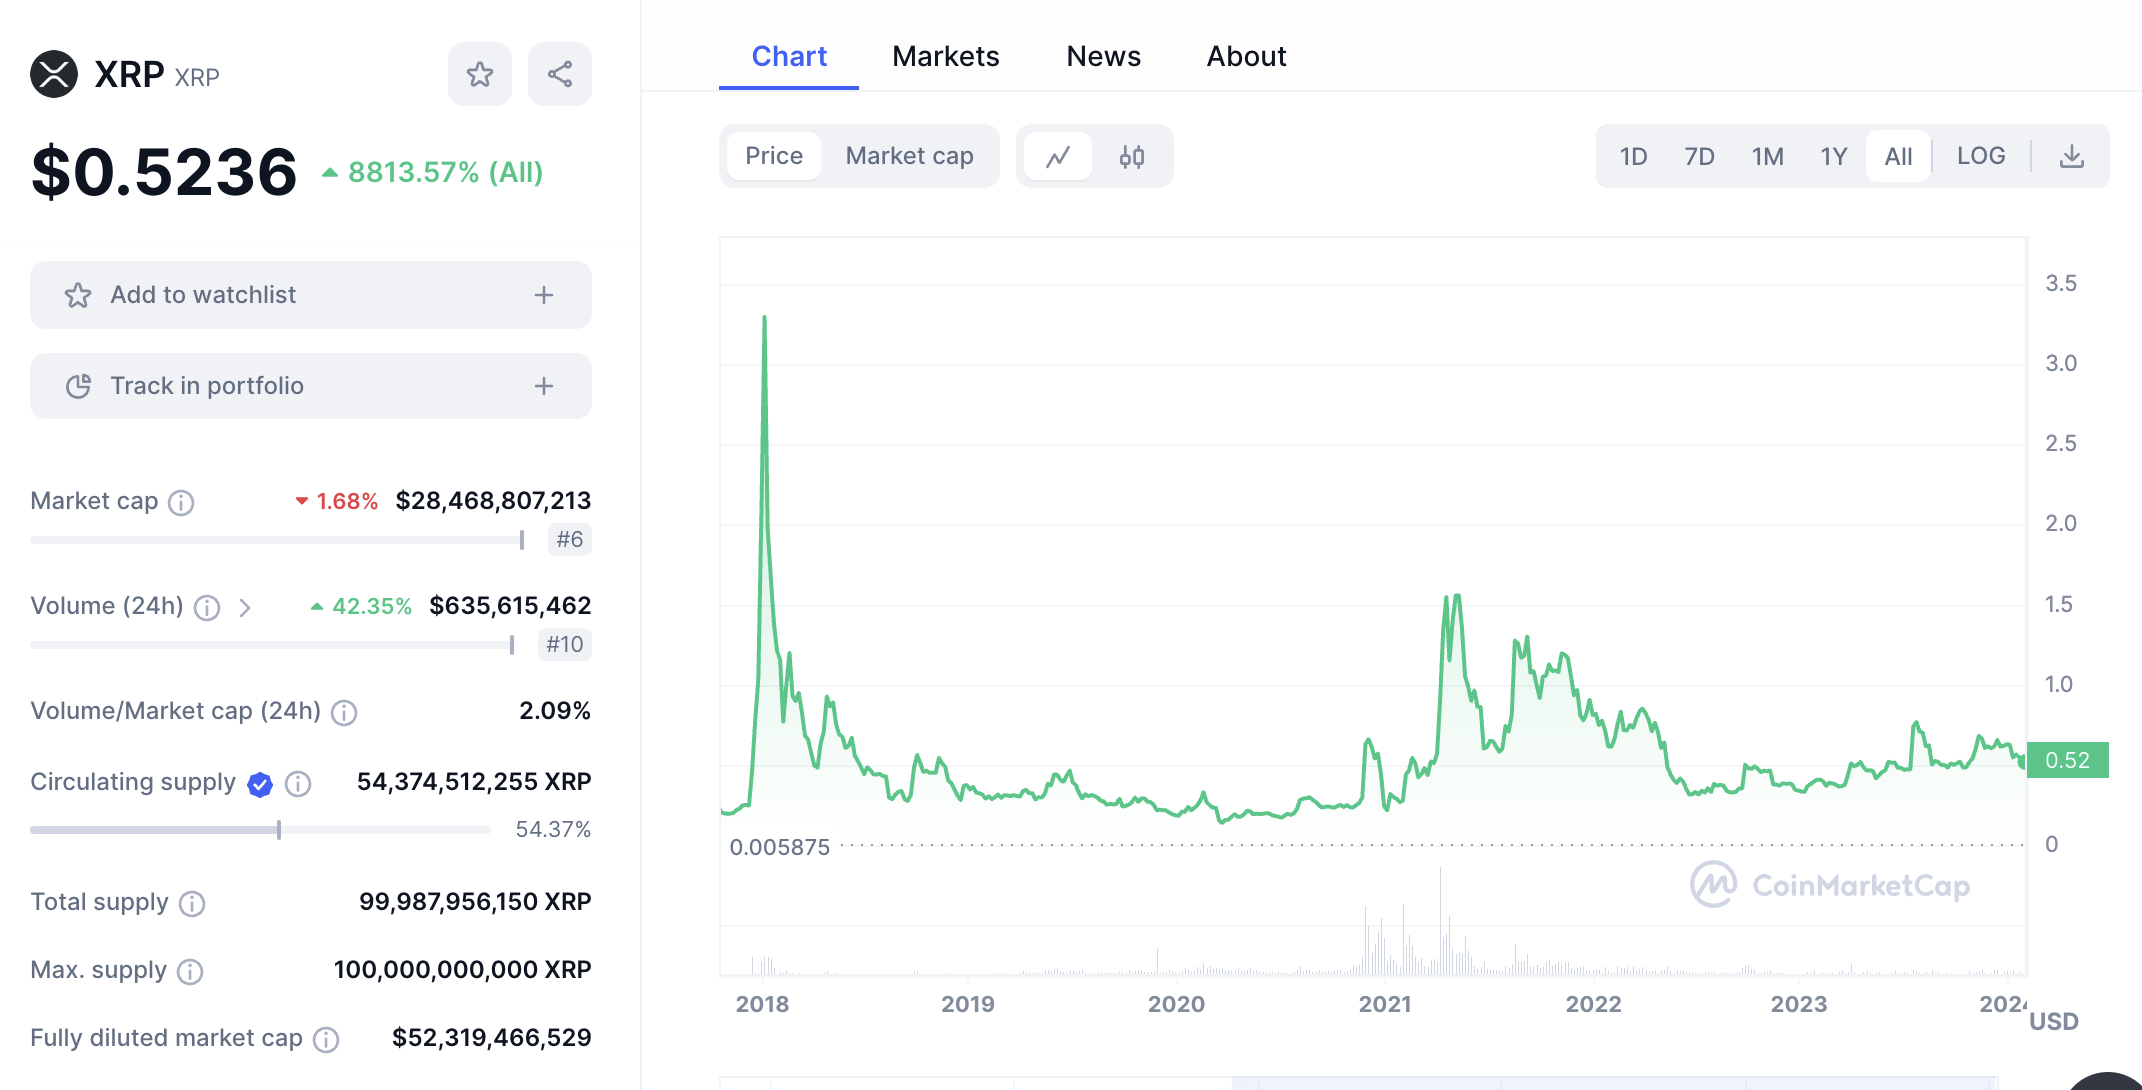 XRP since all-time high in 2018